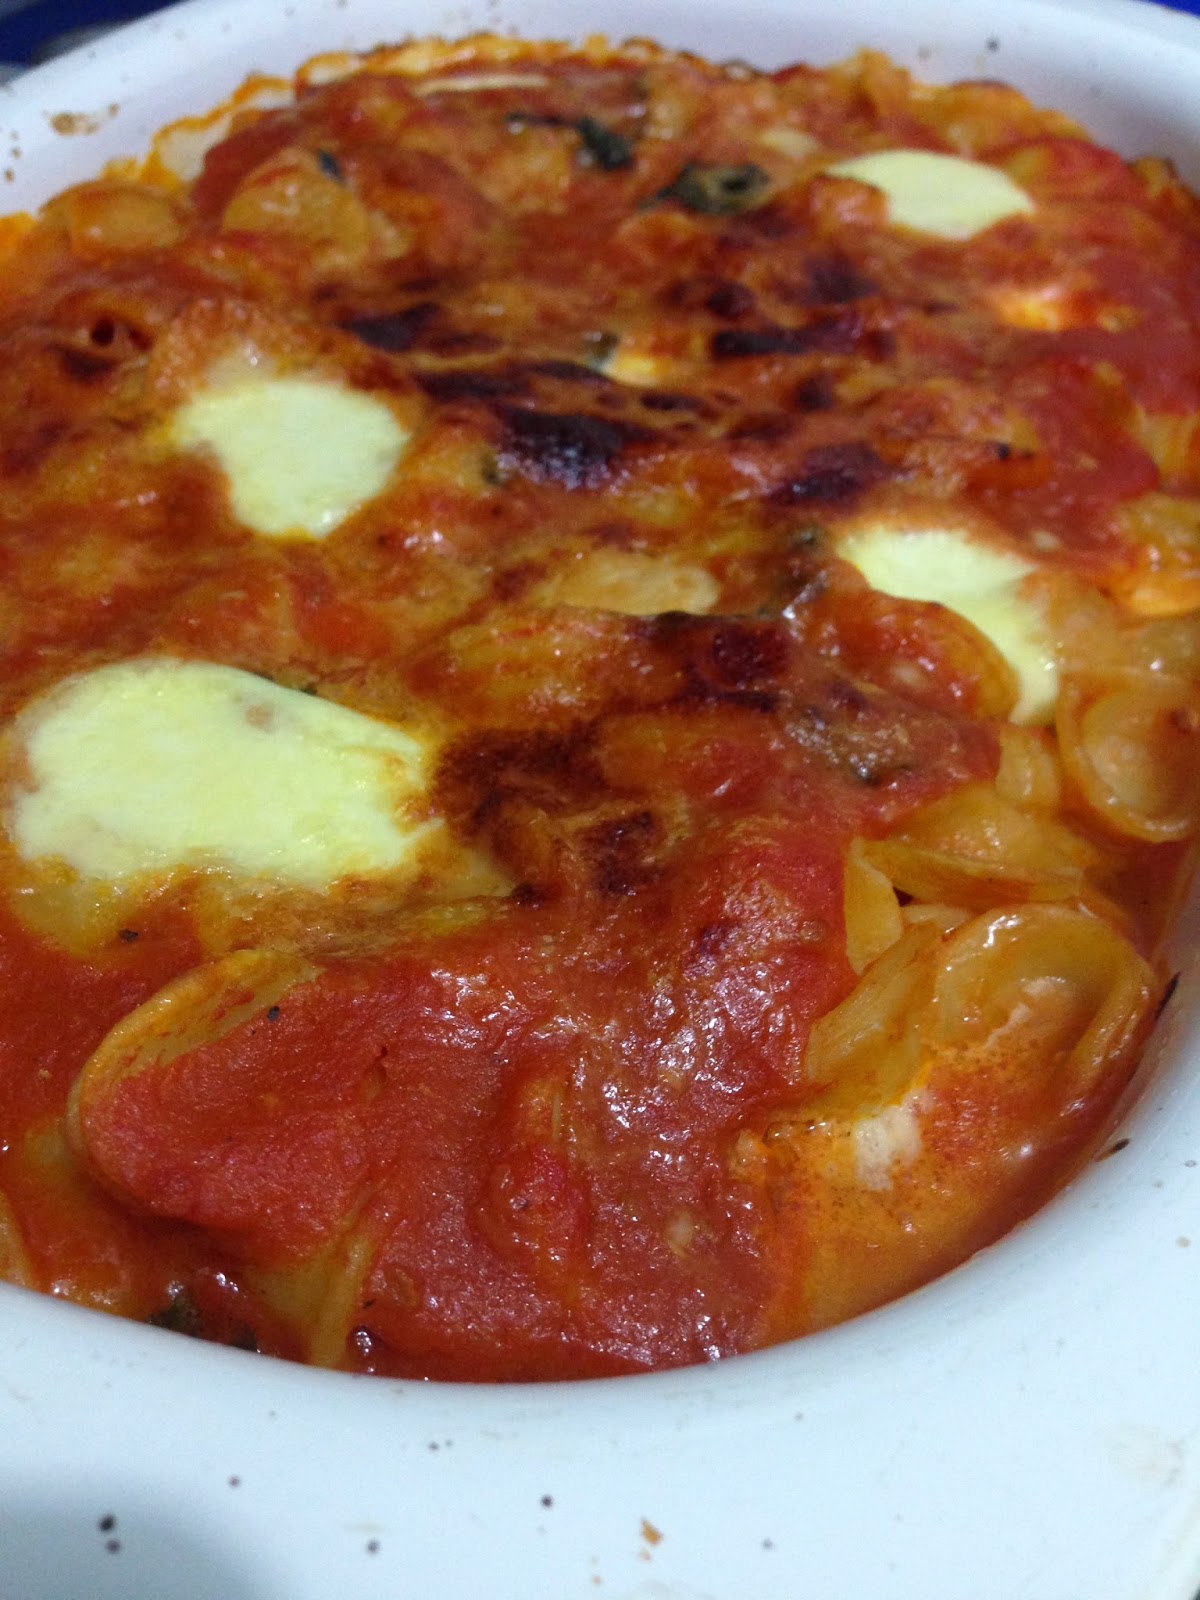 Jamie Oliver's Baked Pasta with Tomatoes & Mozzarella from Jamie's Italy cookbook.